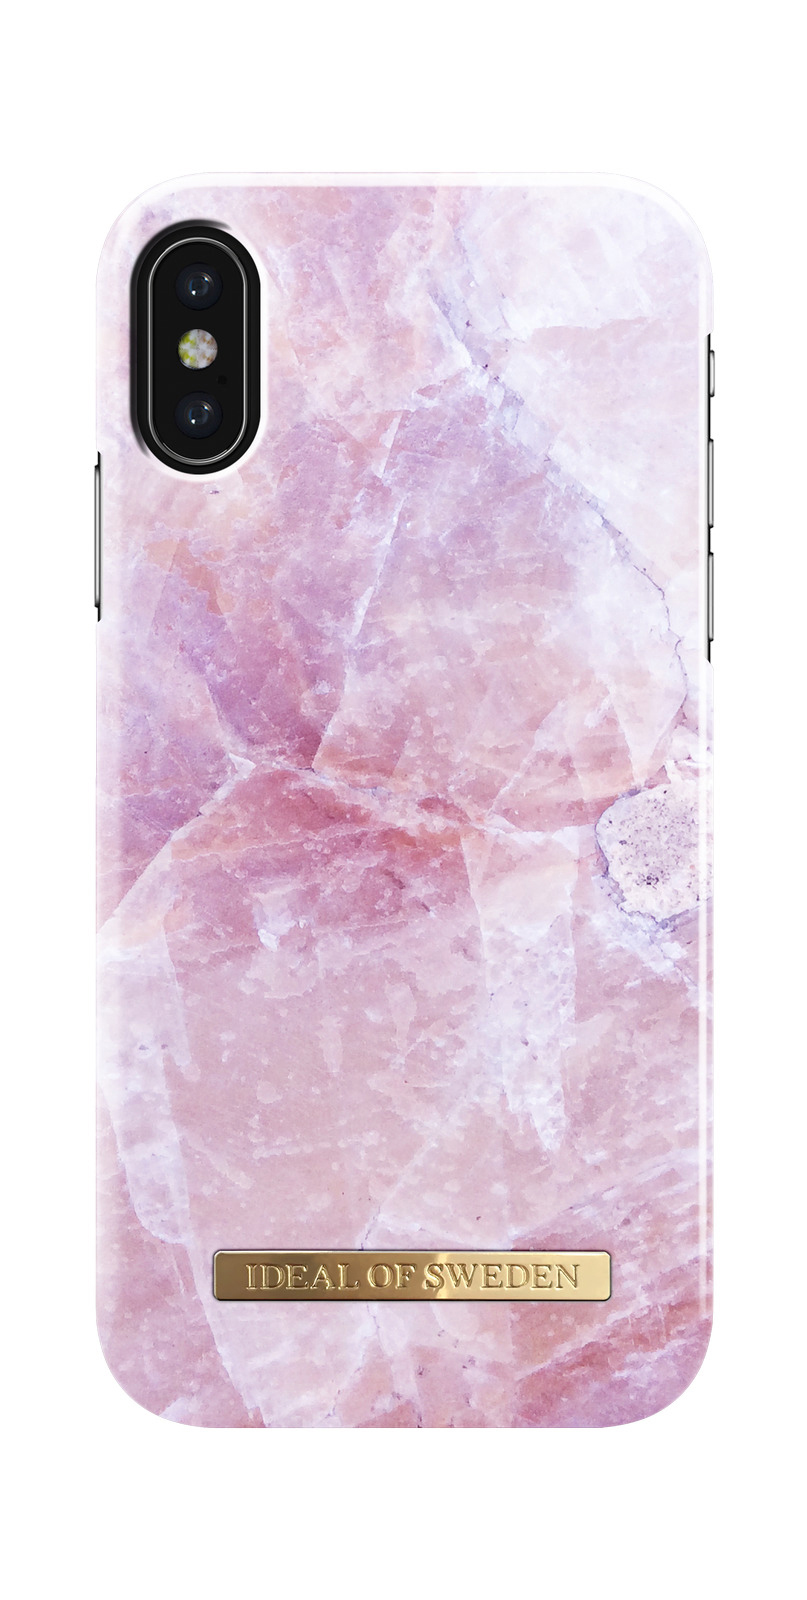 IDEAL OF Apple, Backcover, Pink iPhone X, Fashion, Marble SWEDEN